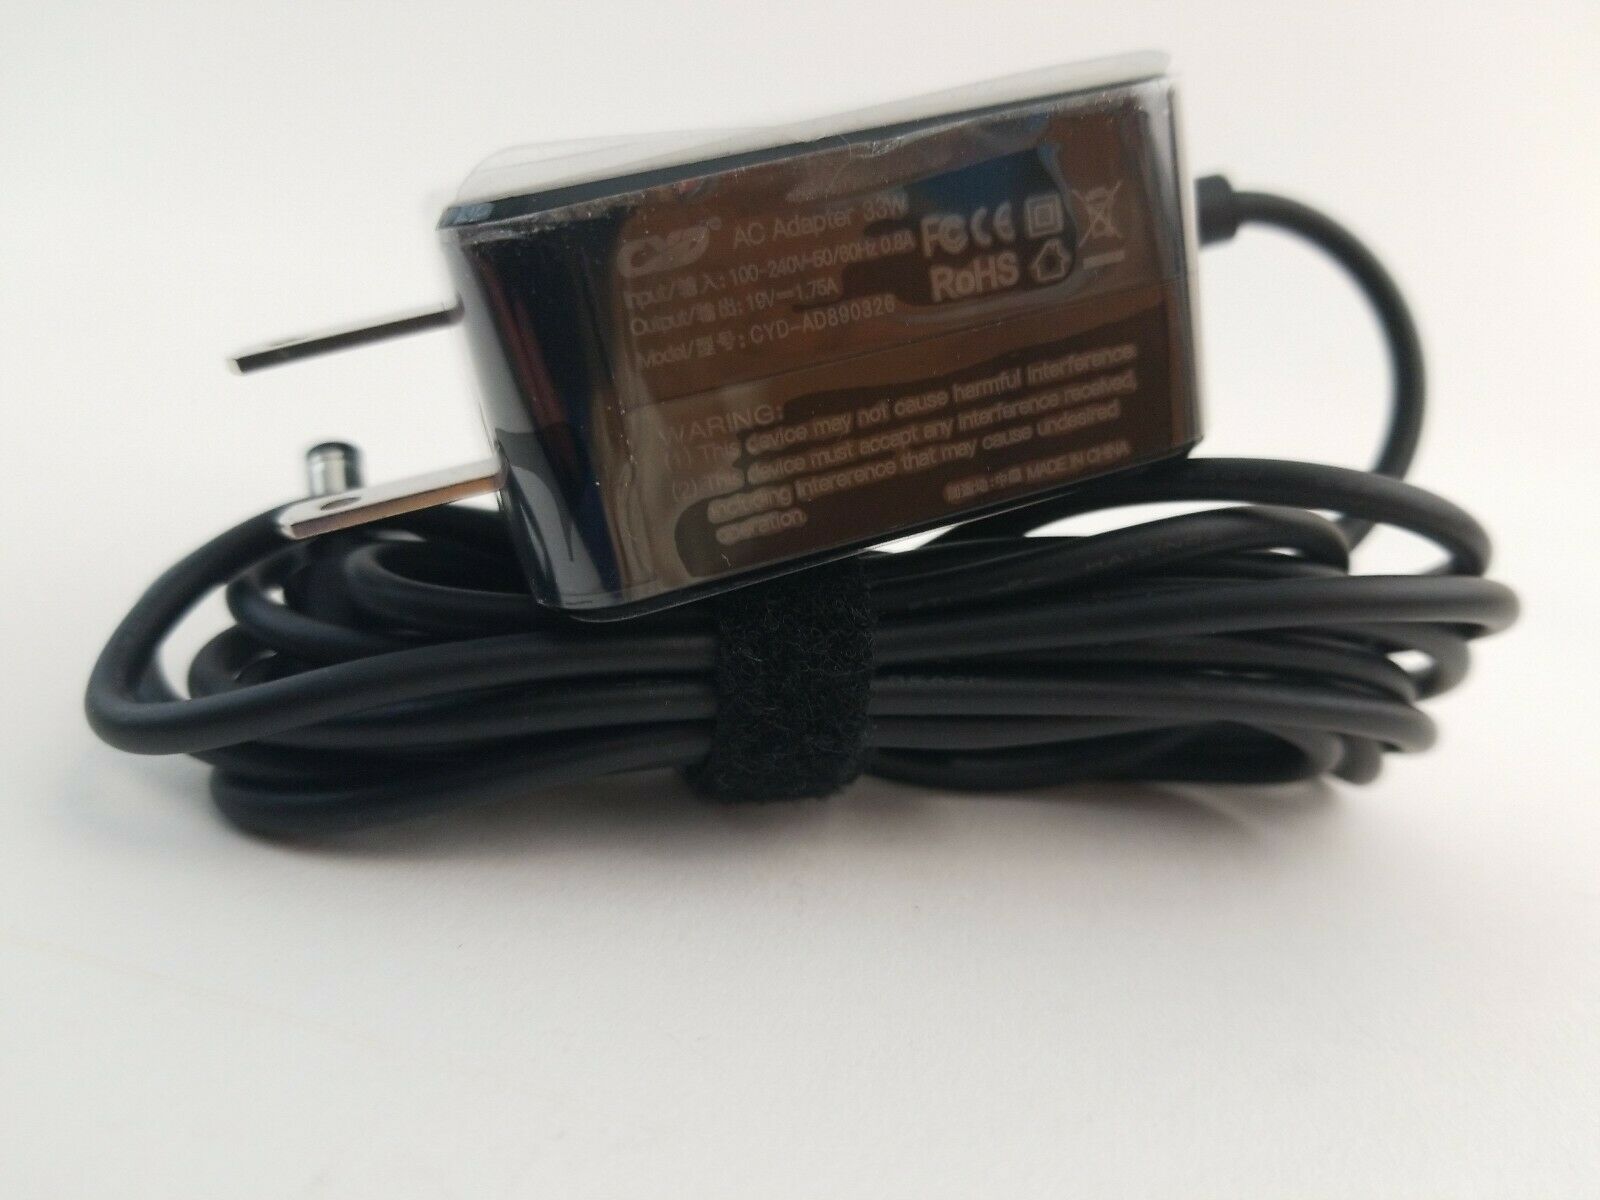 CYD-AD890326 AC Adapter 33W Charger Power Supply CYD In 100-240V-50/60Hz 0.8A Brand: CYD Output Current: 1.75A Type: - Click Image to Close